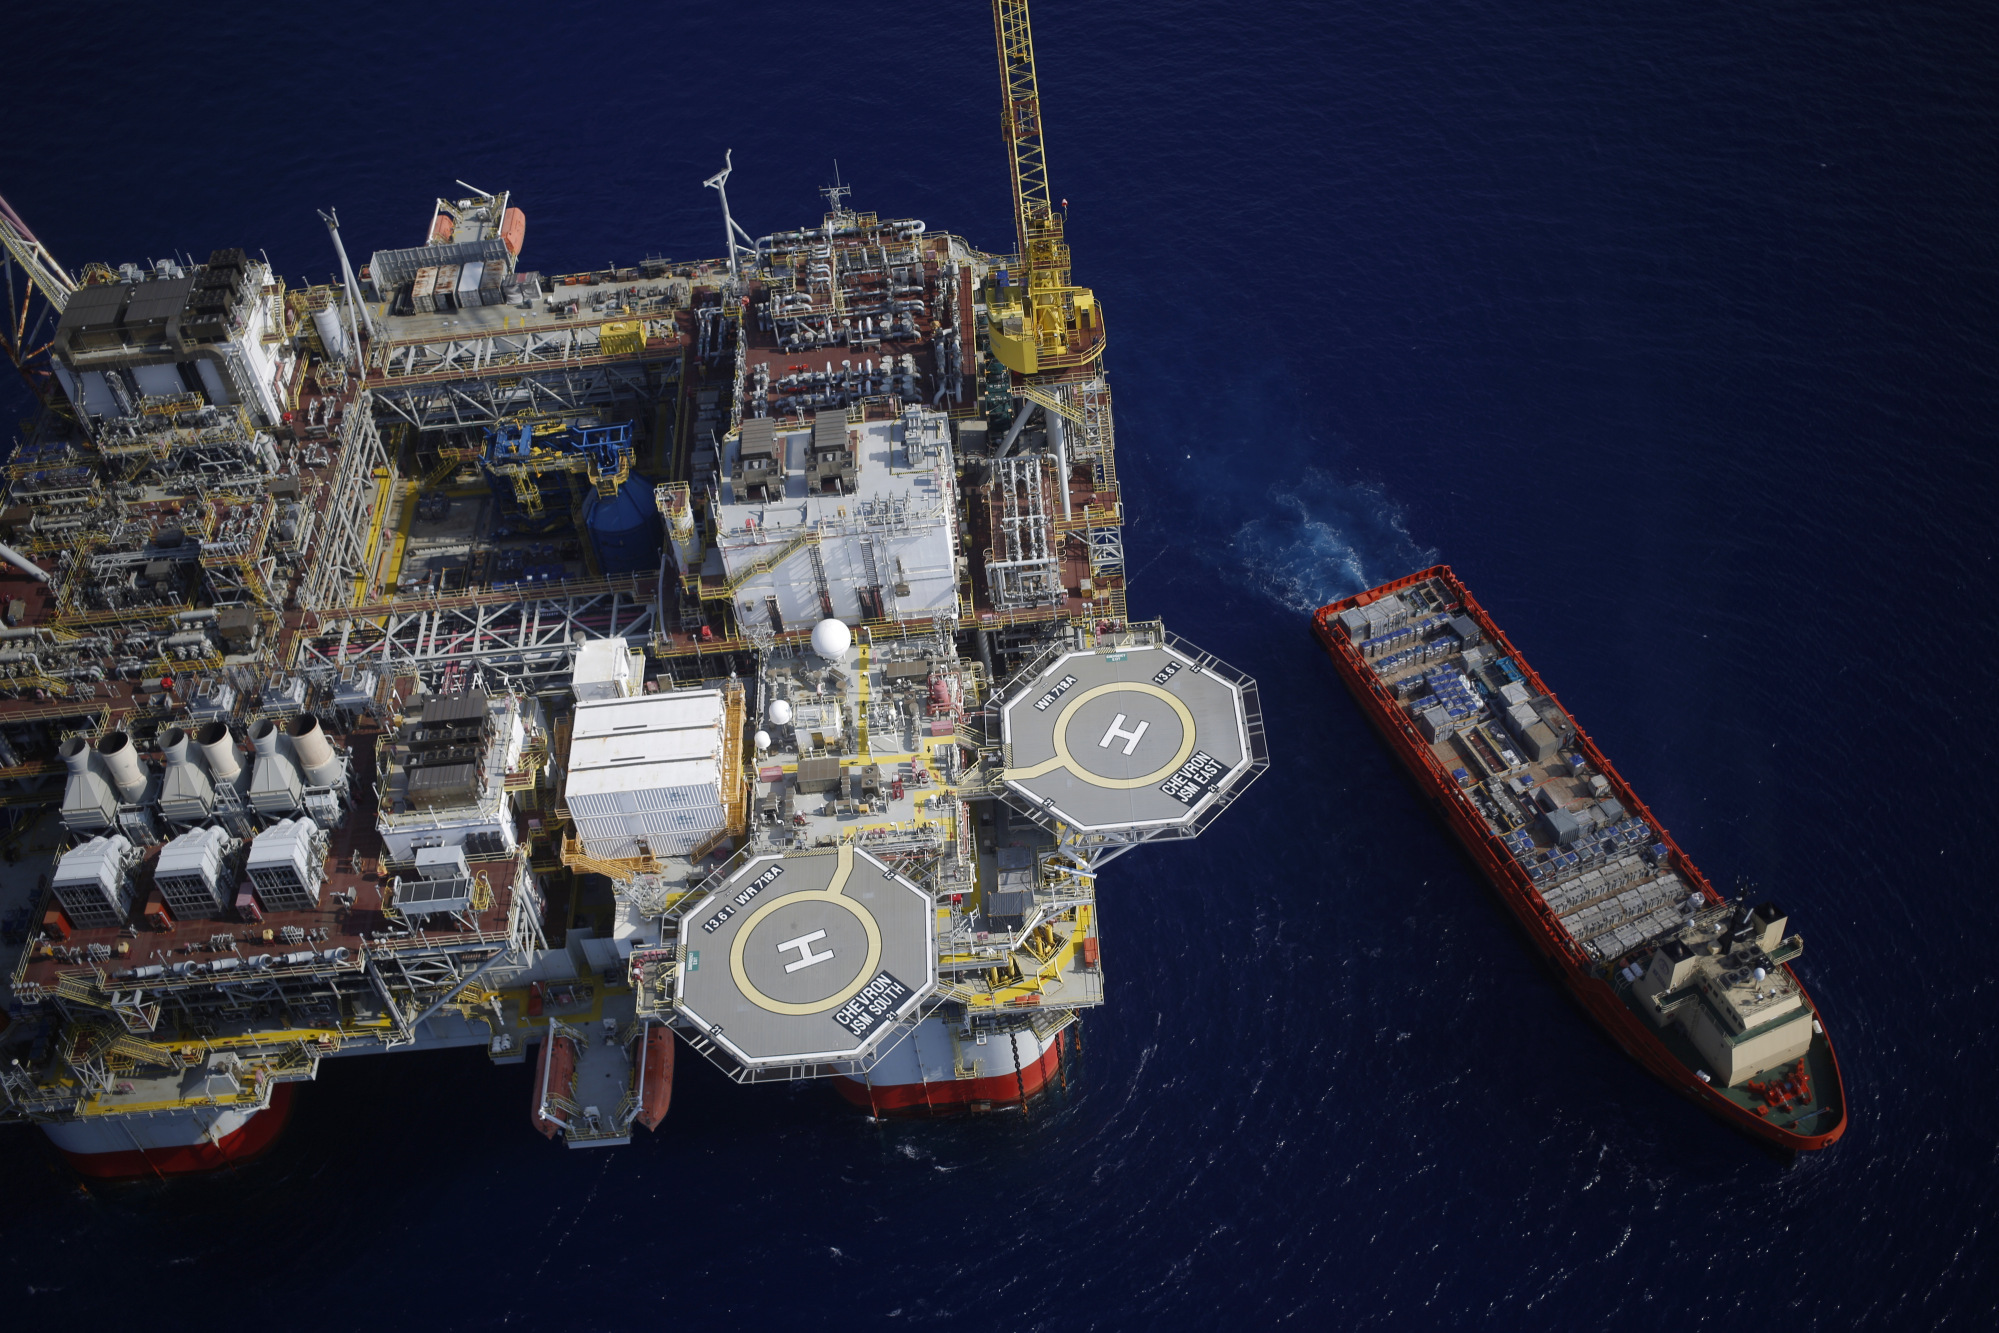 Workers have returned to oil platforms which were evacuated ahead of the storm